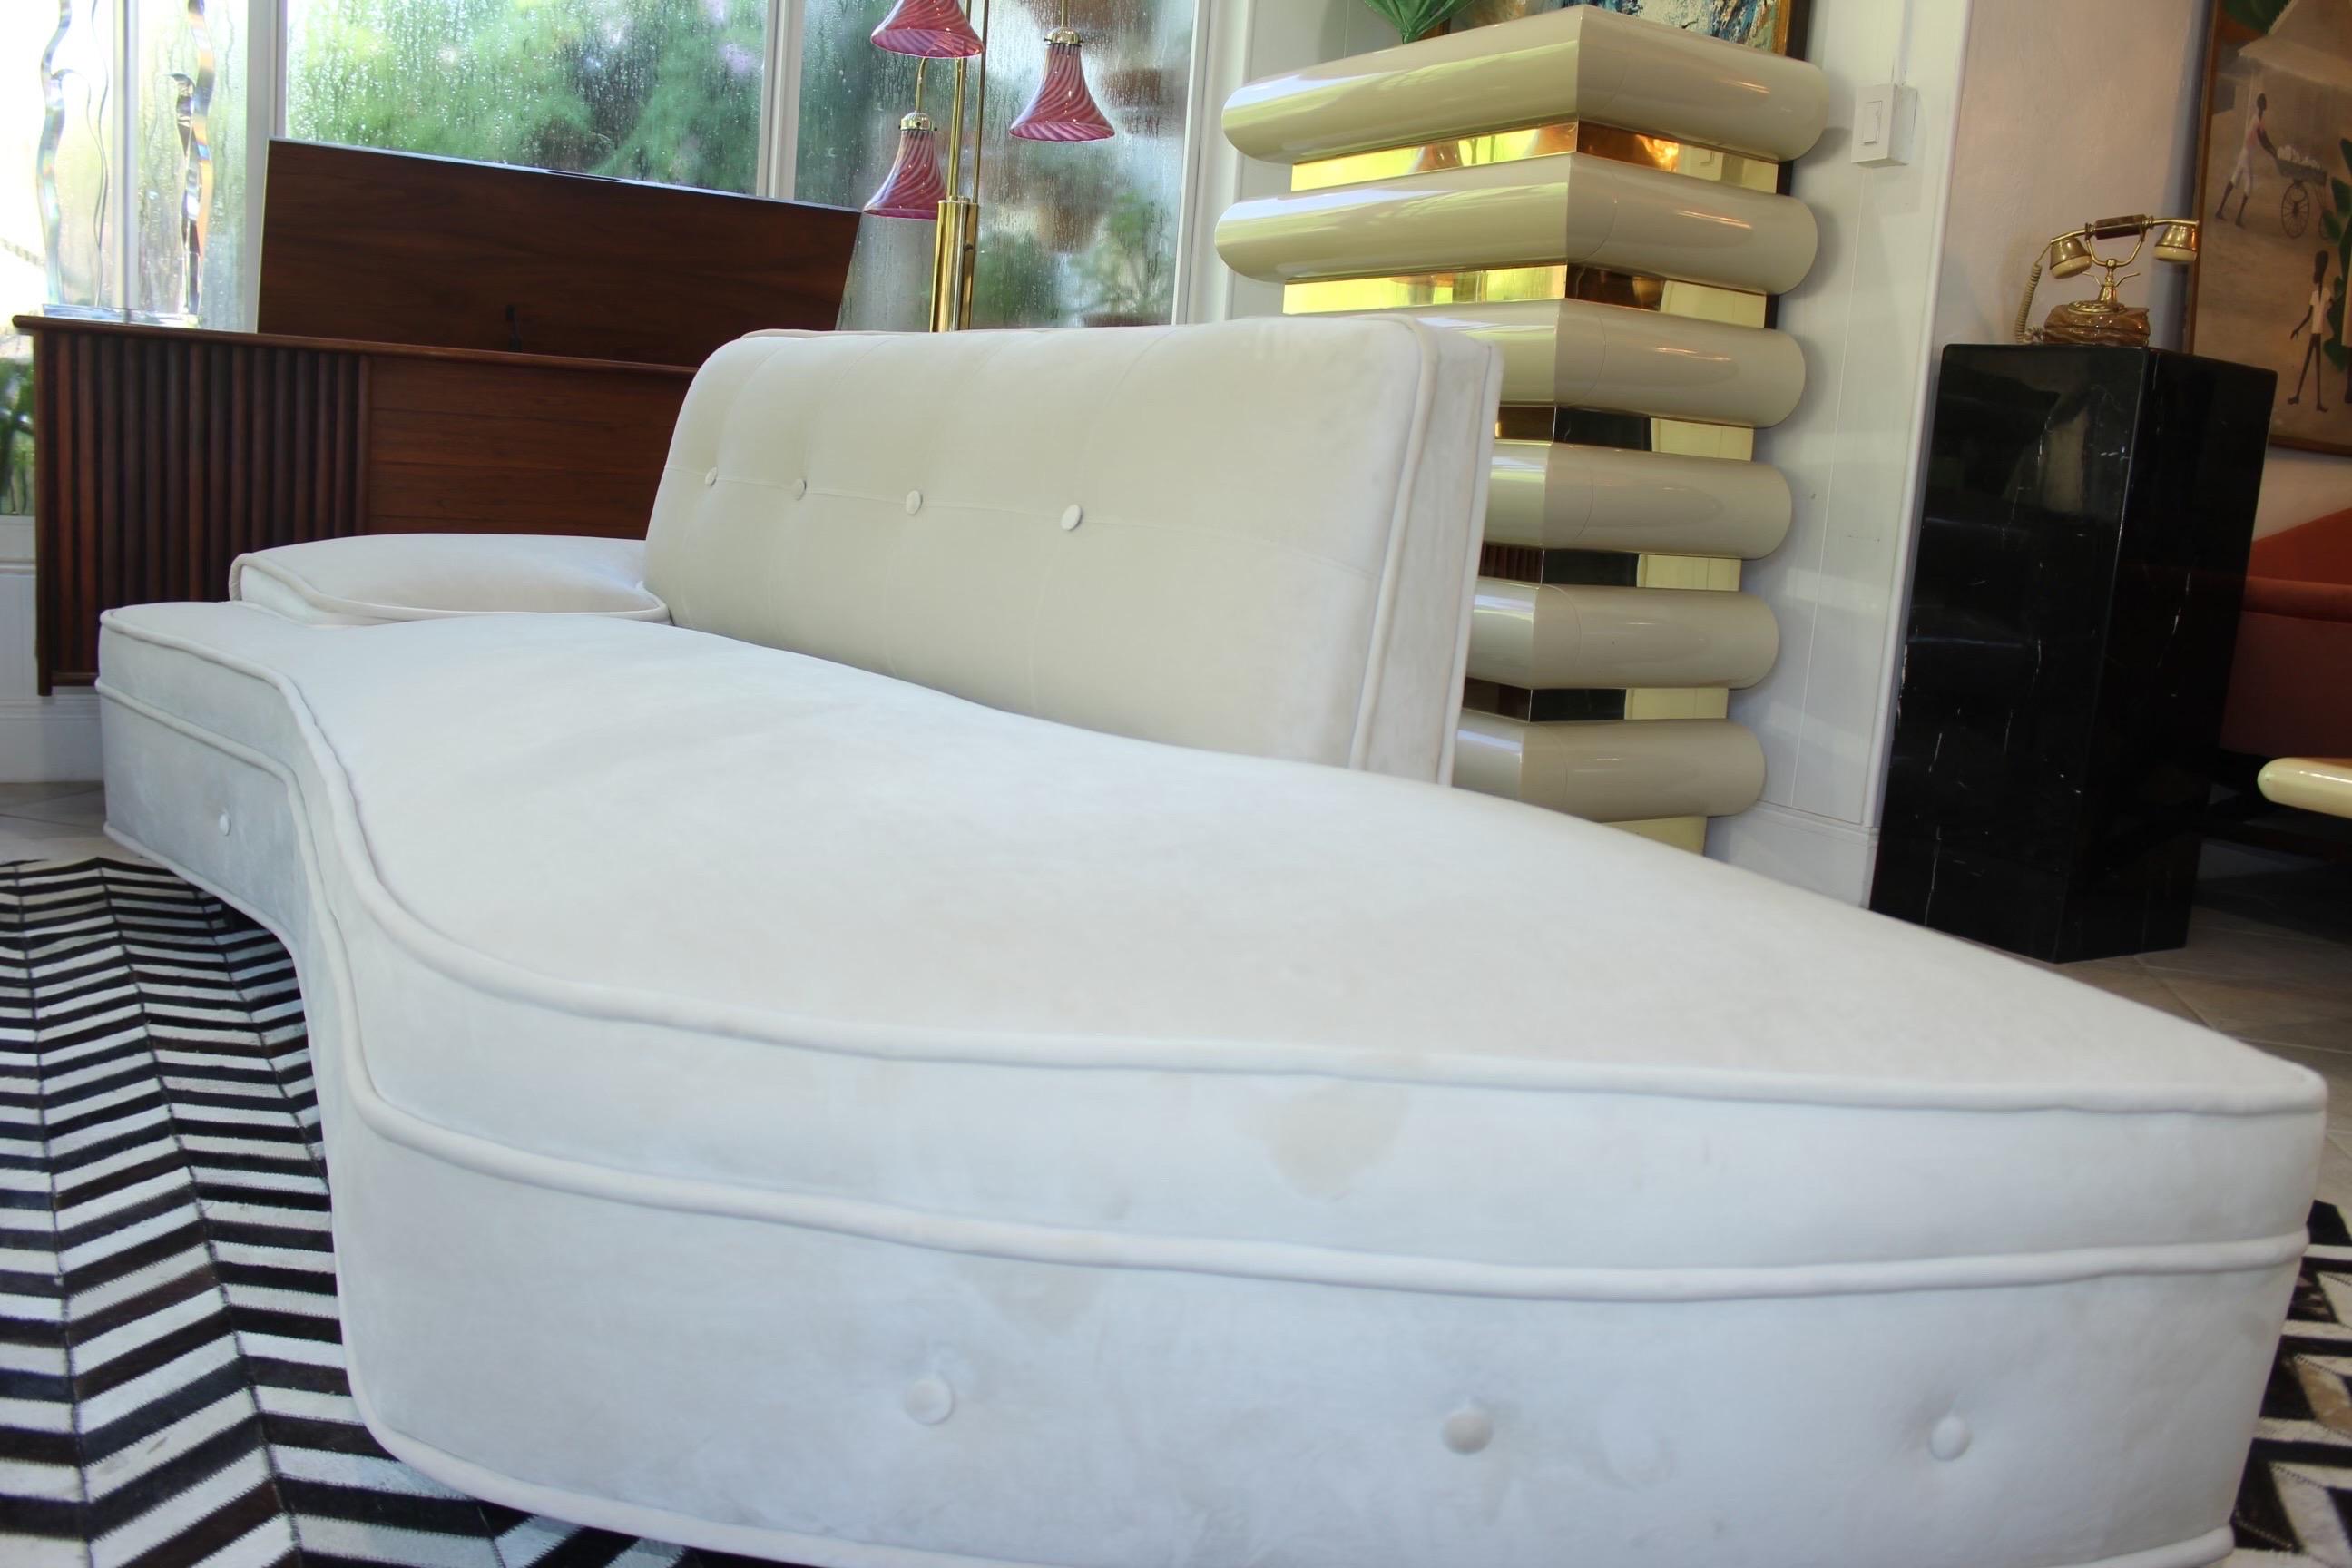 Vintage Midcentury Modern sofa newly reupholstered with performance high quality ivory velvet. Classic 1950’s rounded end on one side and one arm attached throw pillow on the other. Special care was taken to keep original structure/design with